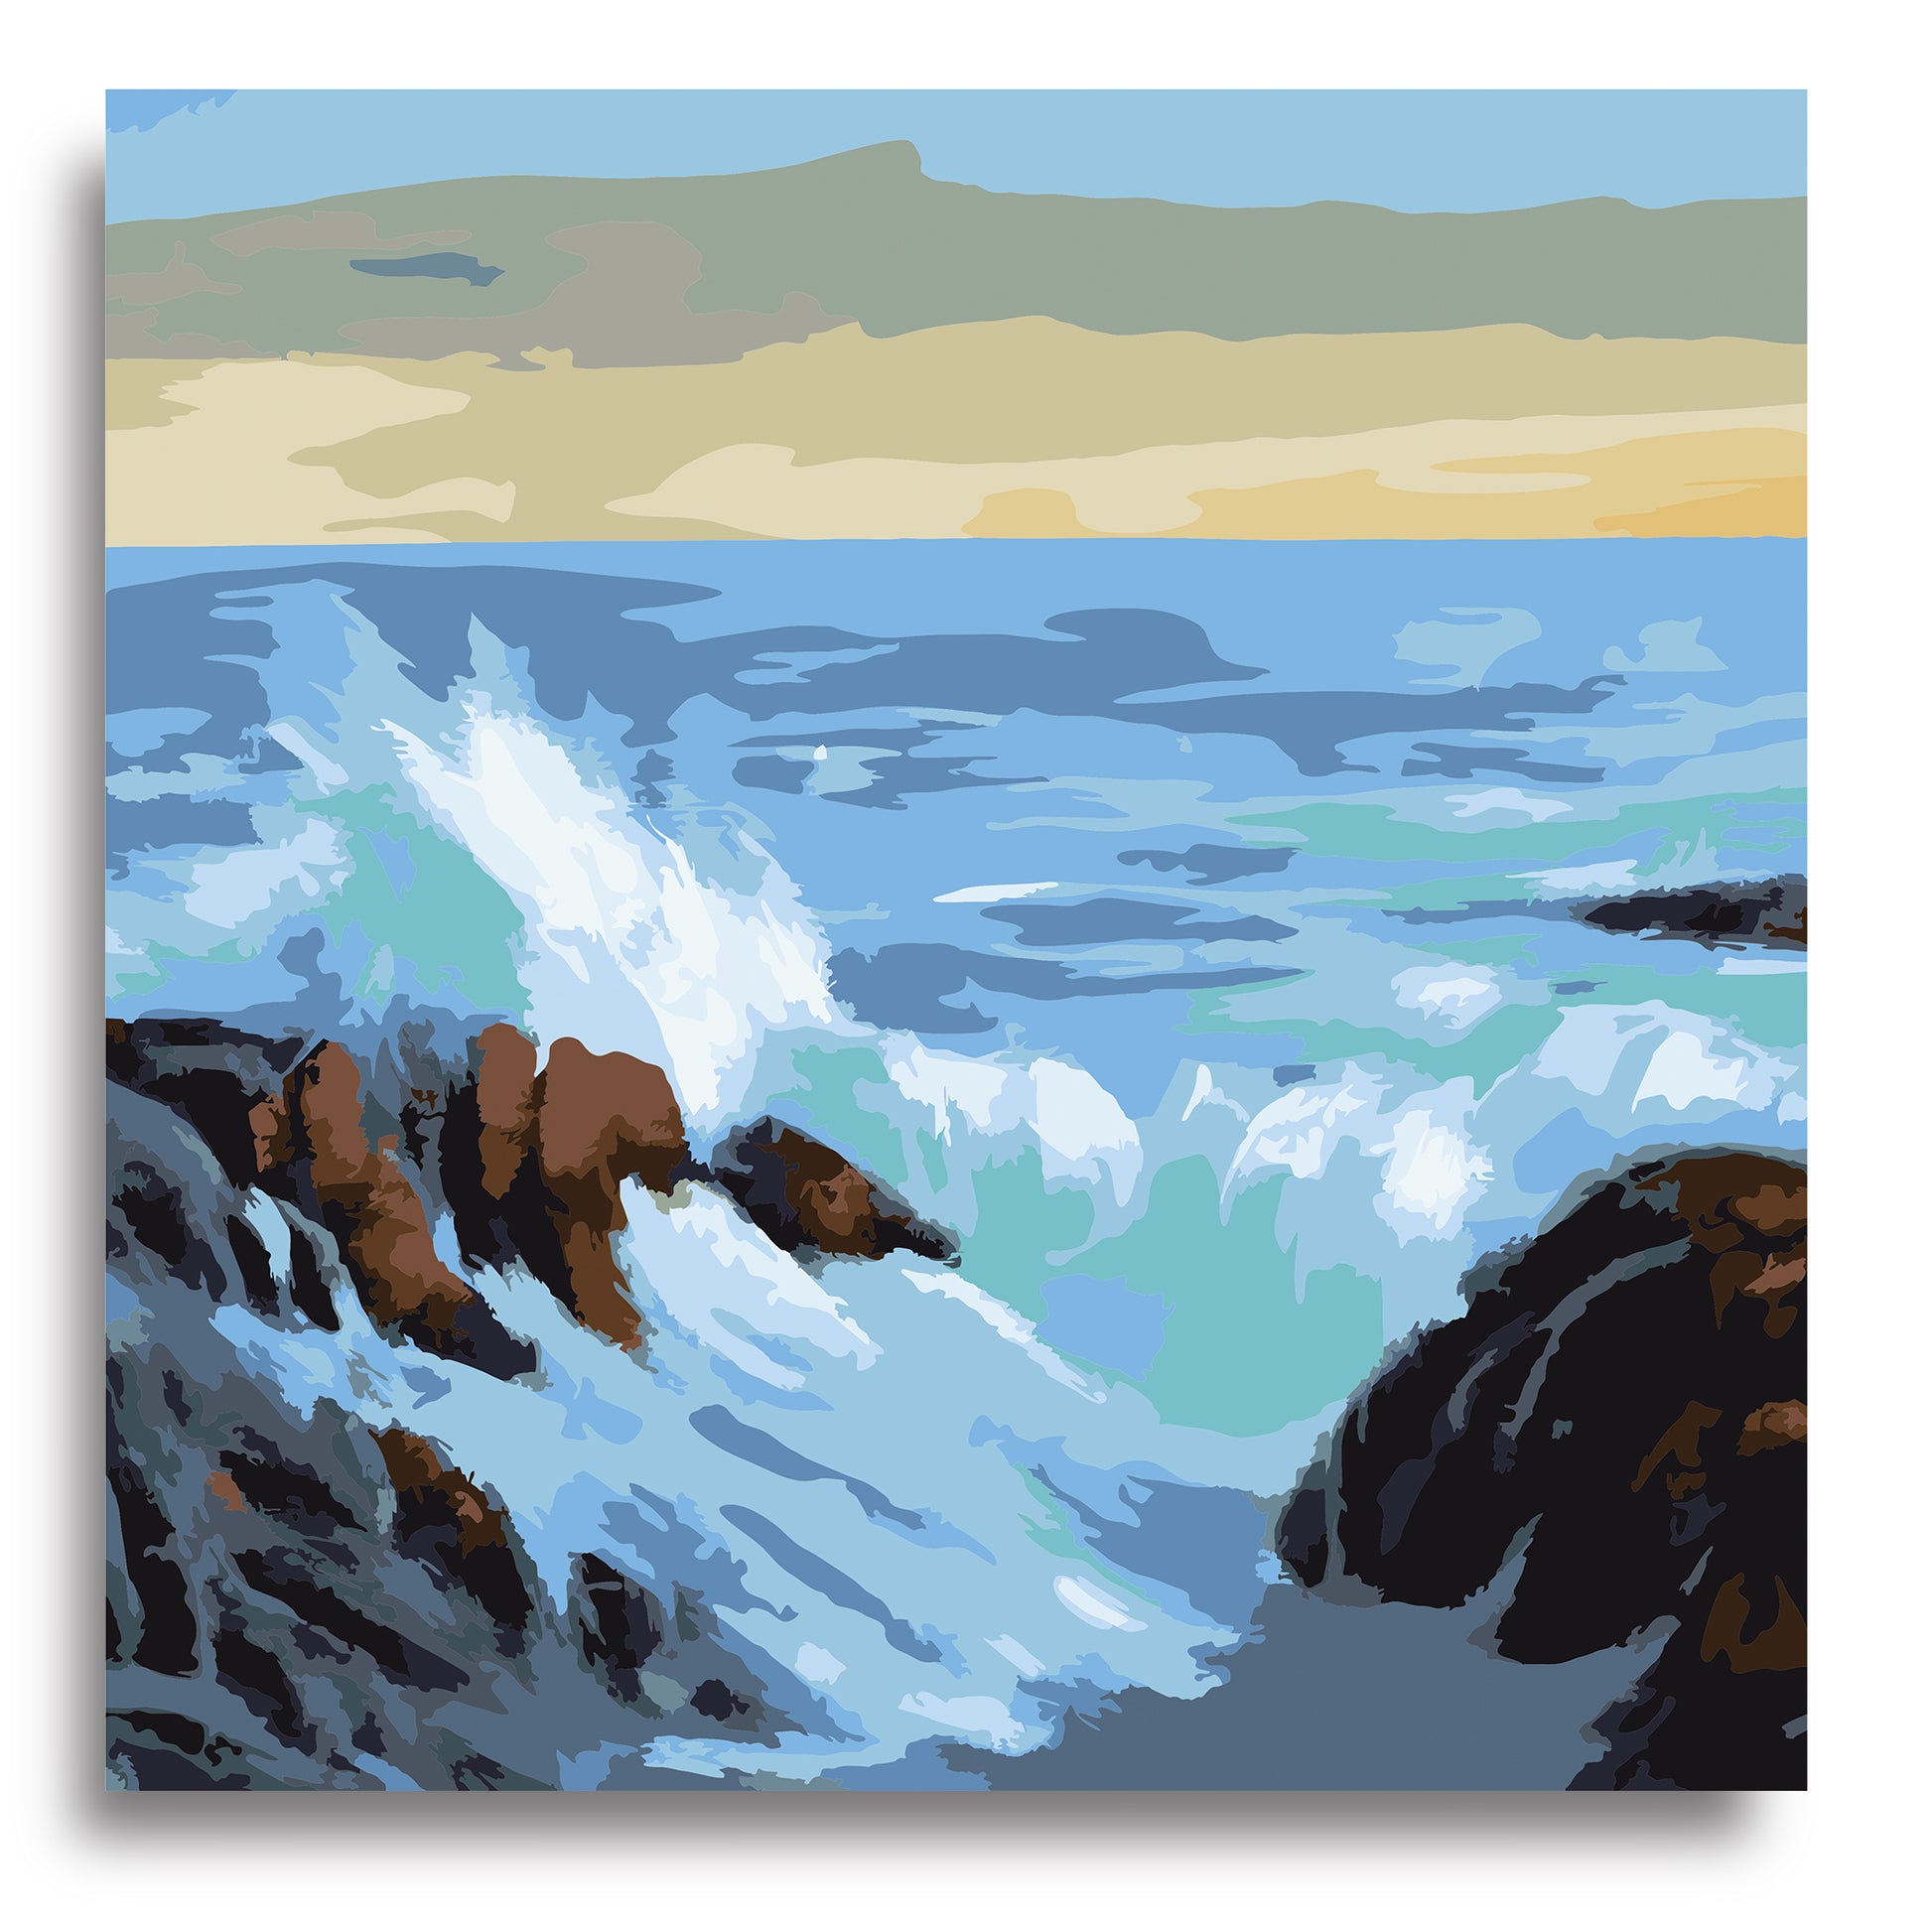 Wavy Wave - Paint by Numbers Kit for Adults DIY Oil Painting Kit on Canvas